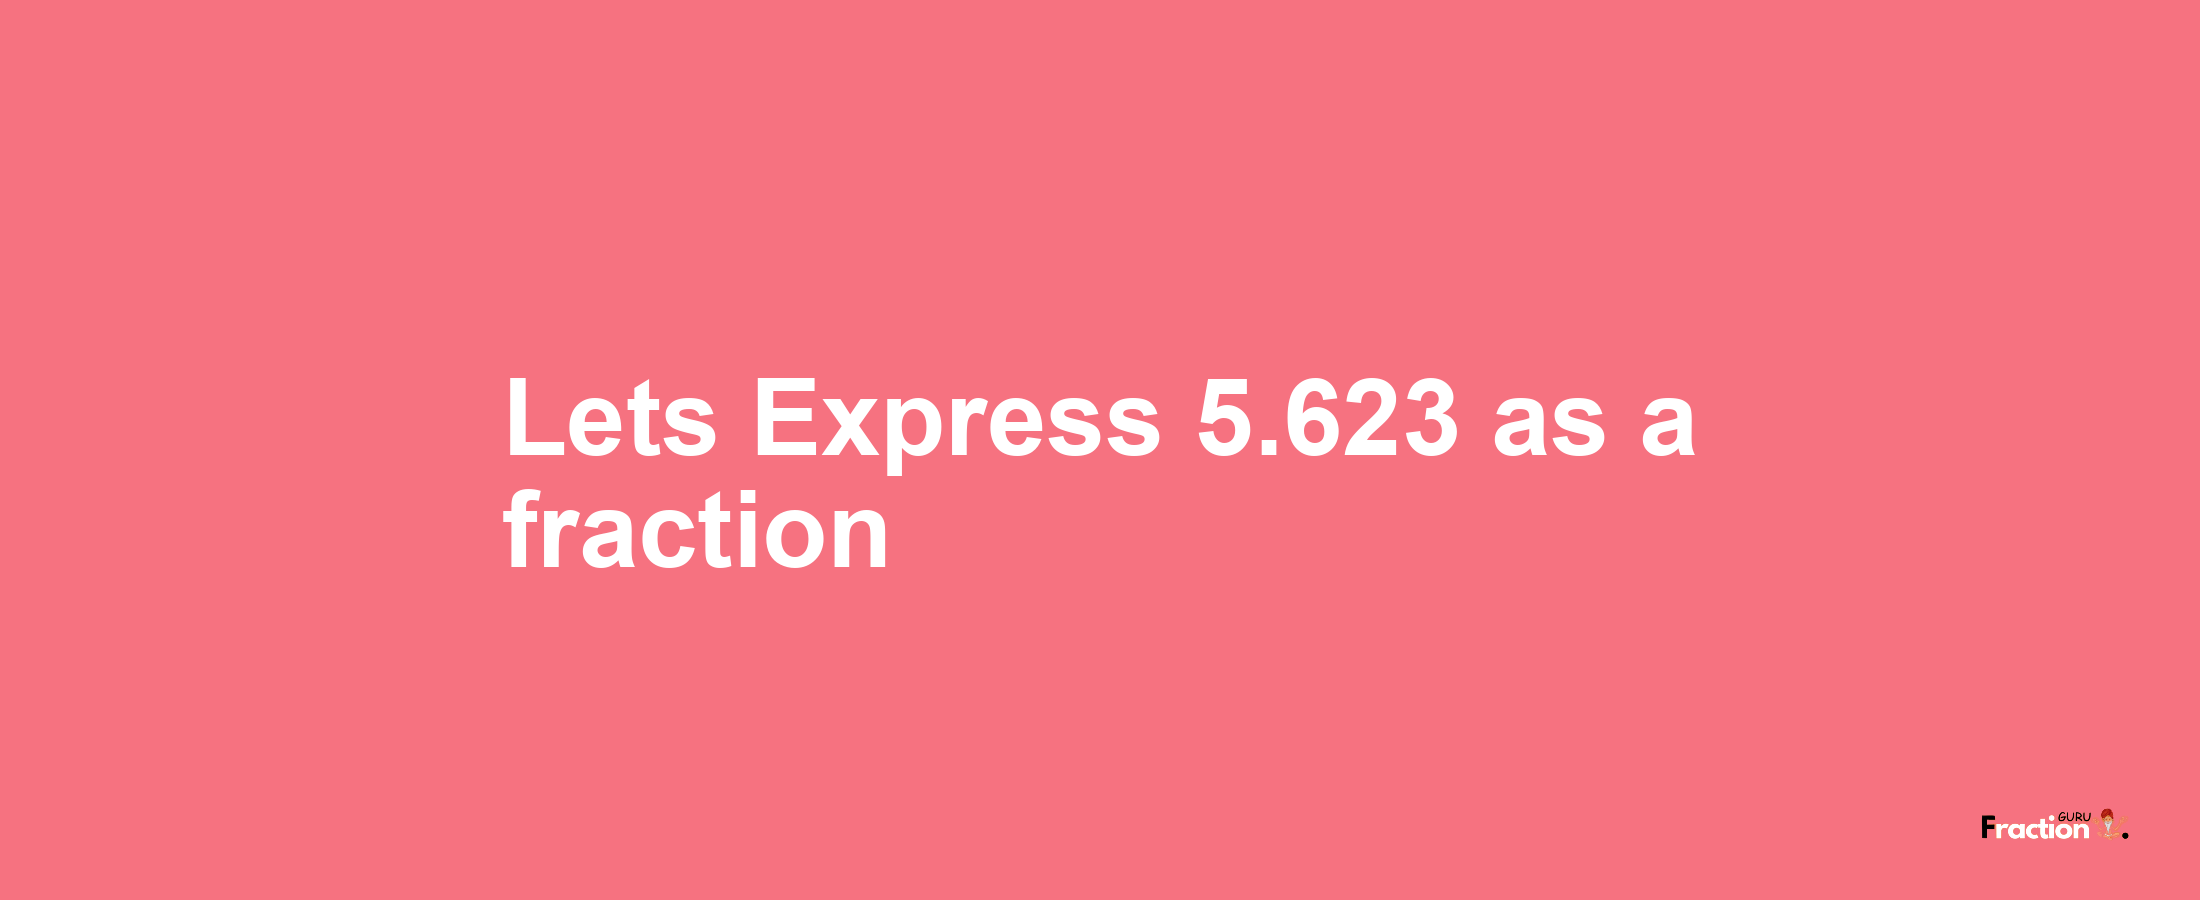 Lets Express 5.623 as afraction